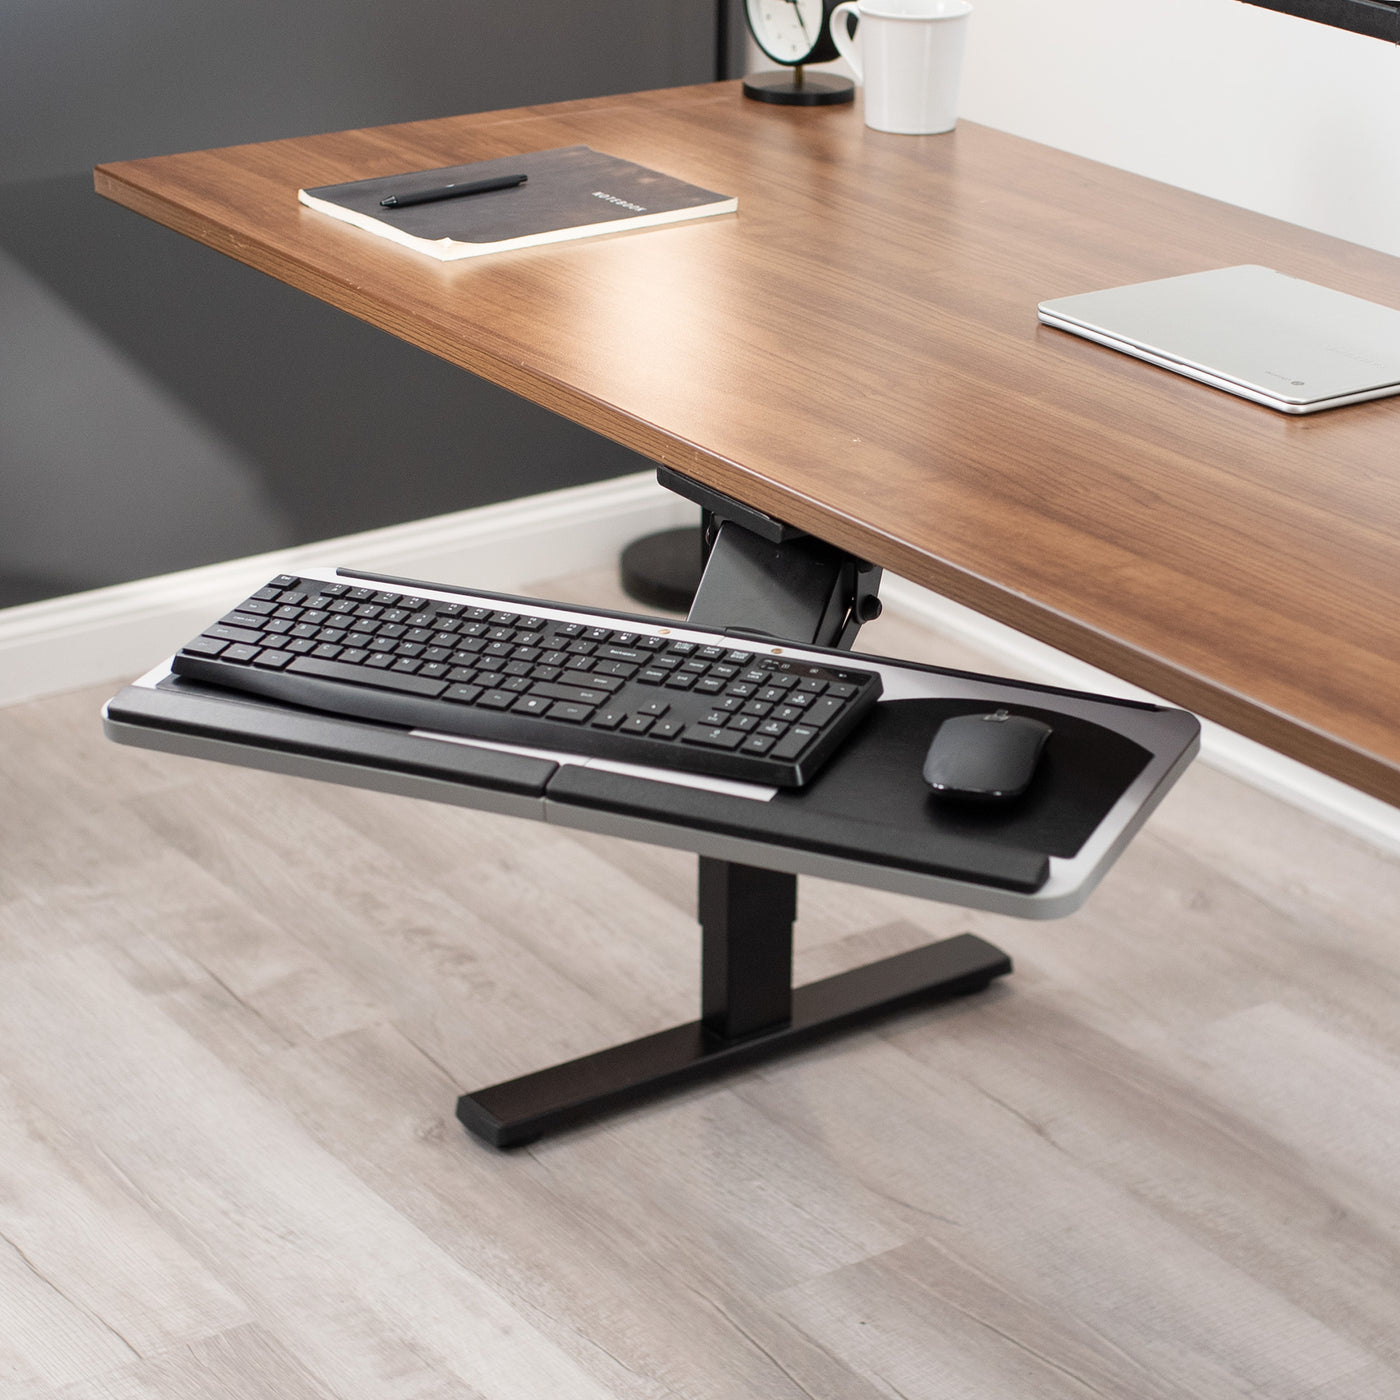 Ergonomic adjustable keyboard tray that mounts to the underside of your desk